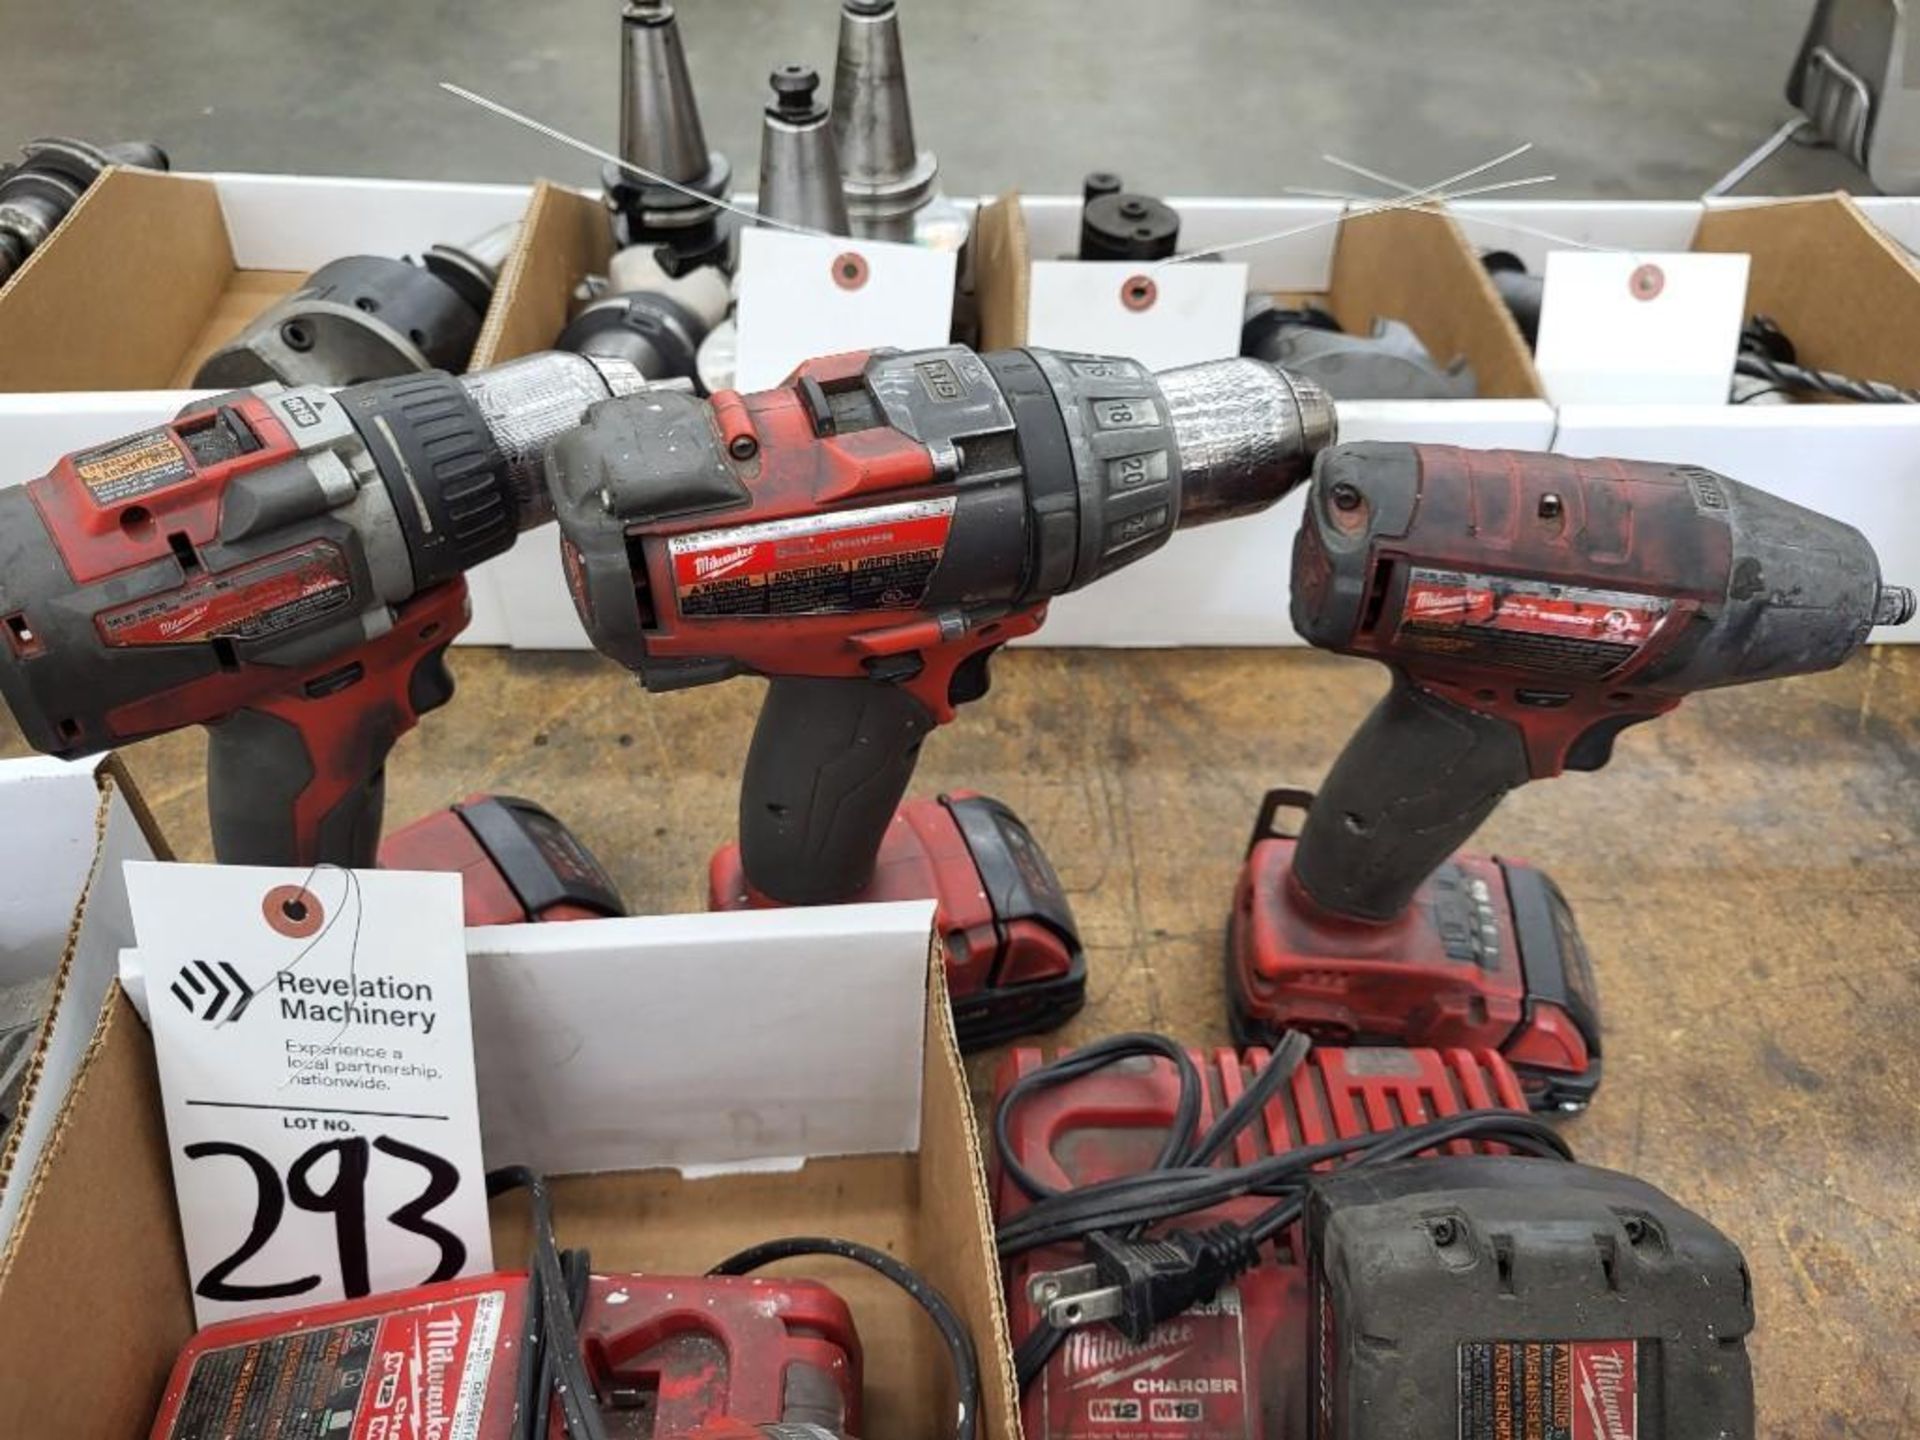 LOT OF MILWAUKEE CORDLIES DRILL DRIVERS, CIRCULAR SAW, CHARGERS, BATTERIES - Image 6 of 6